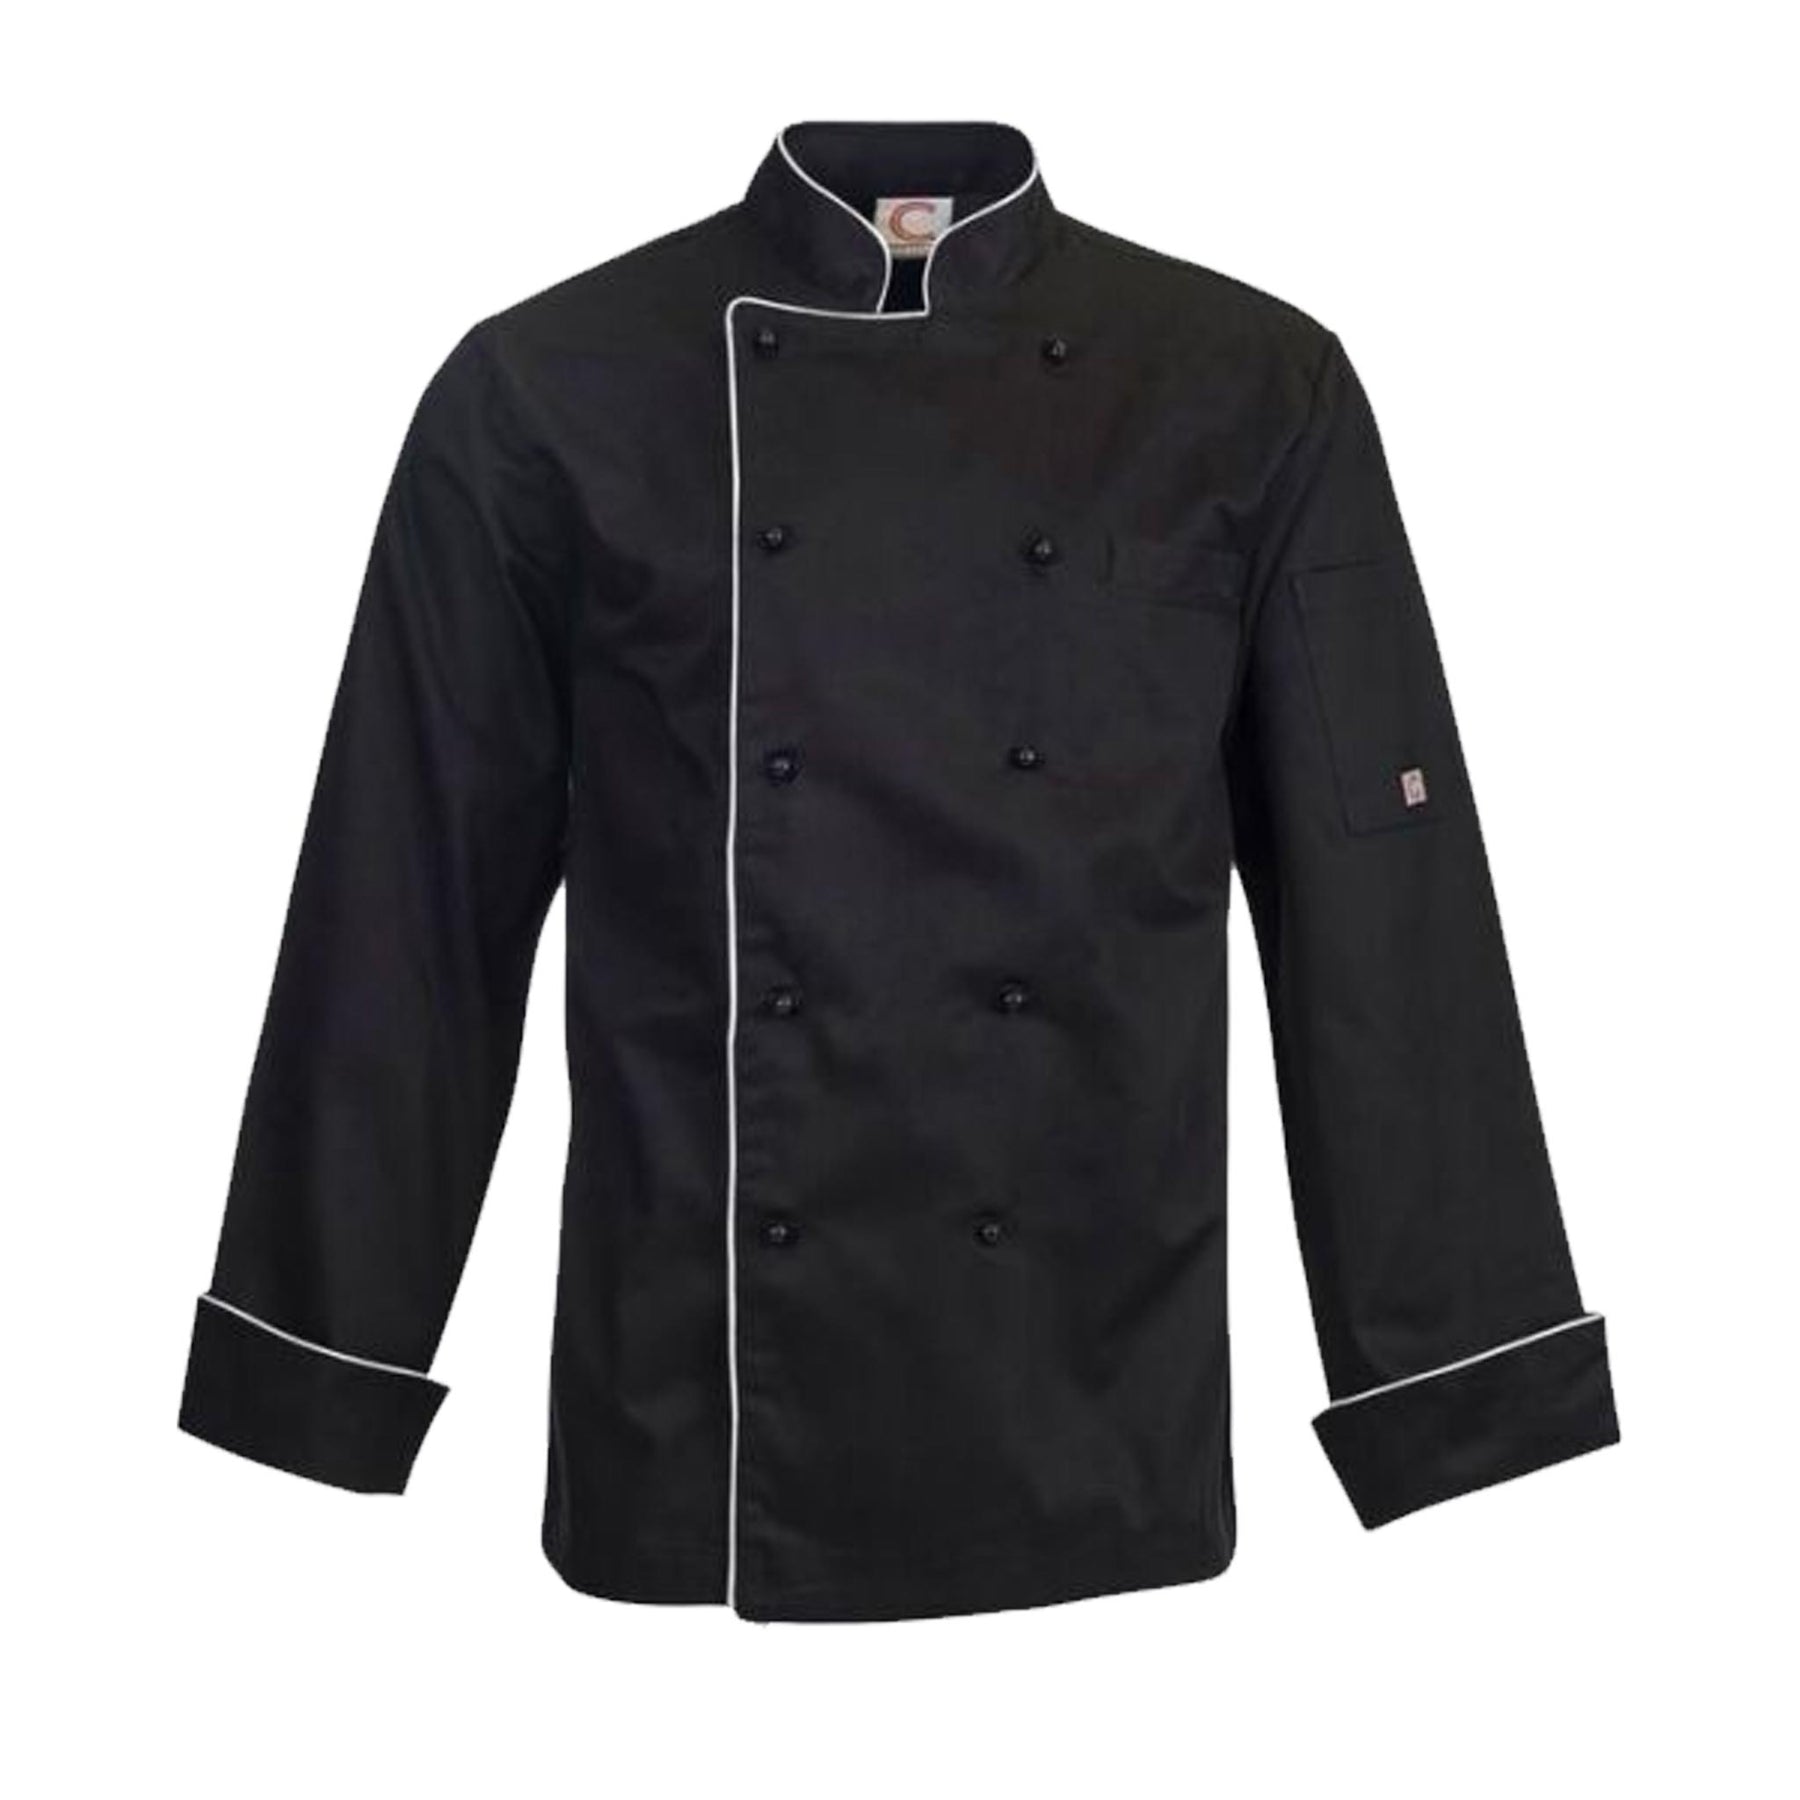 black long sleeve executive chefs jacket with piping